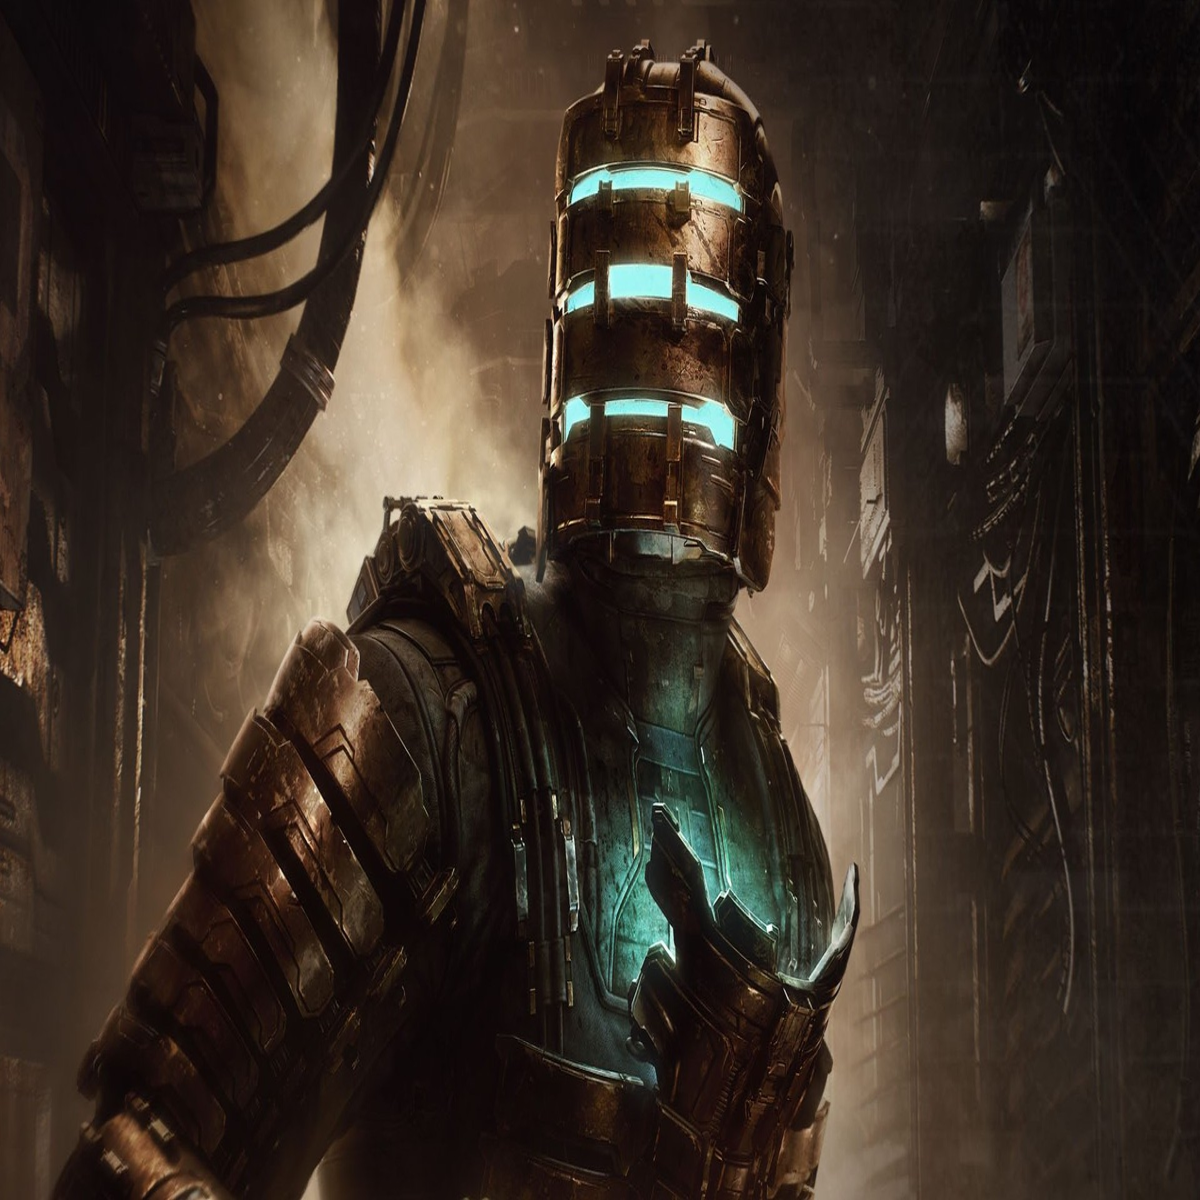 Dead Space - CHAPTER 4: OBLITERATION IMMINENT (Impossible) 